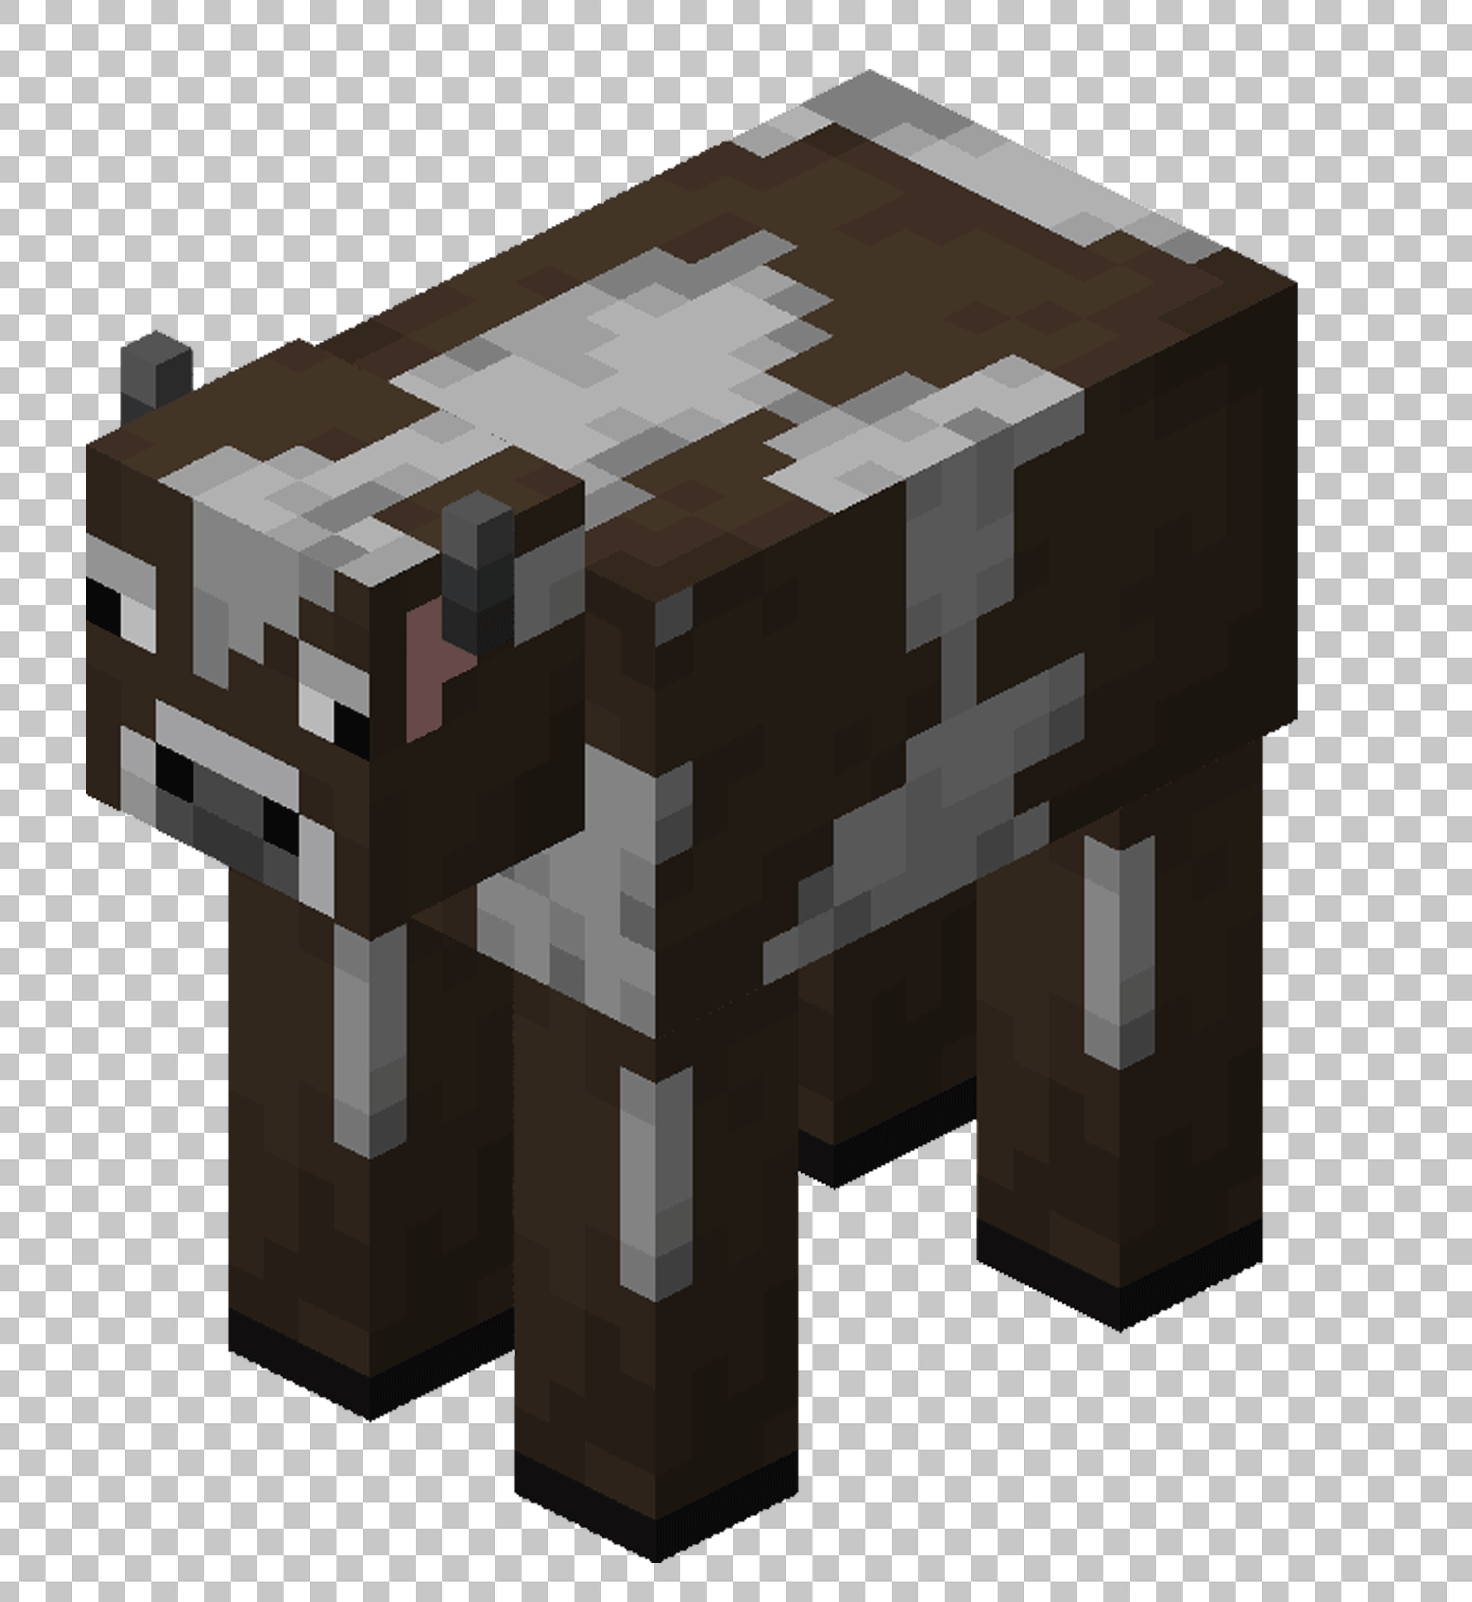 Minecraft Cow PNG Image